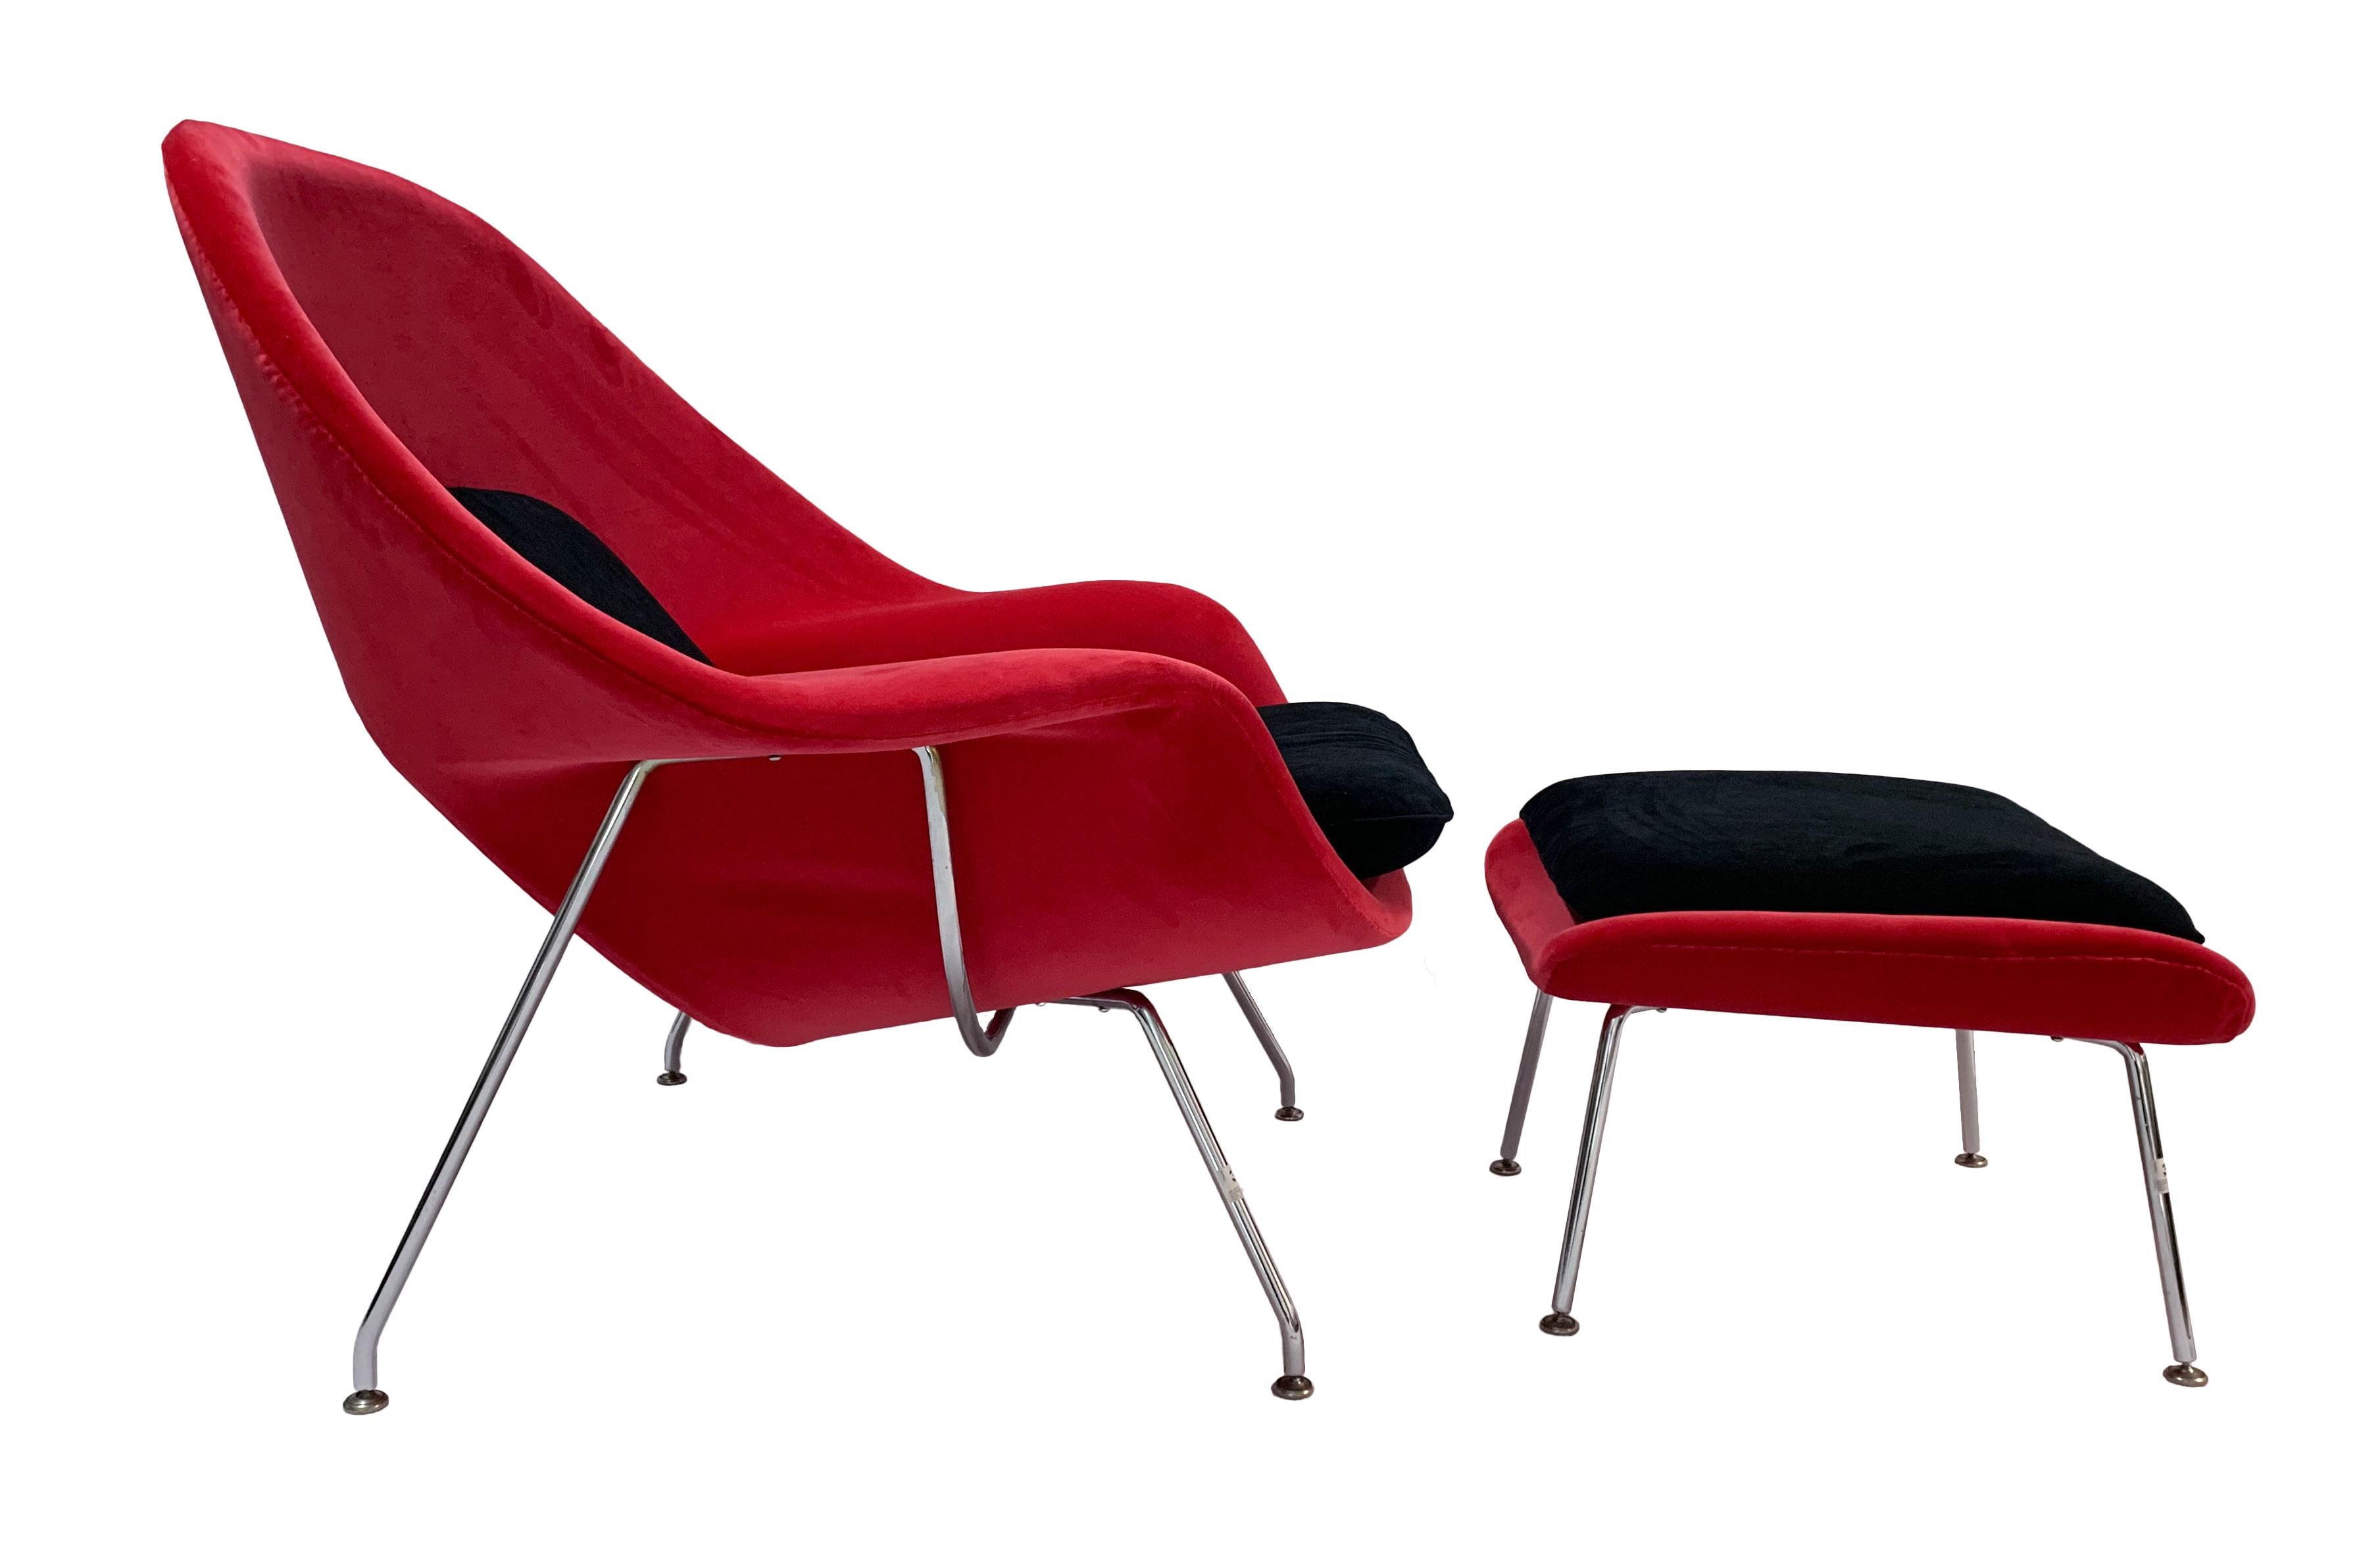 Iconic Mid-Century Modern Knoll womb chair and ottoman. Fully refurbished and reupholstered in a feisty Bernard Velluti red velvet with back and seat cushions in a Carlucci black velvet. The ottoman is covered in red velvet with a black cushion